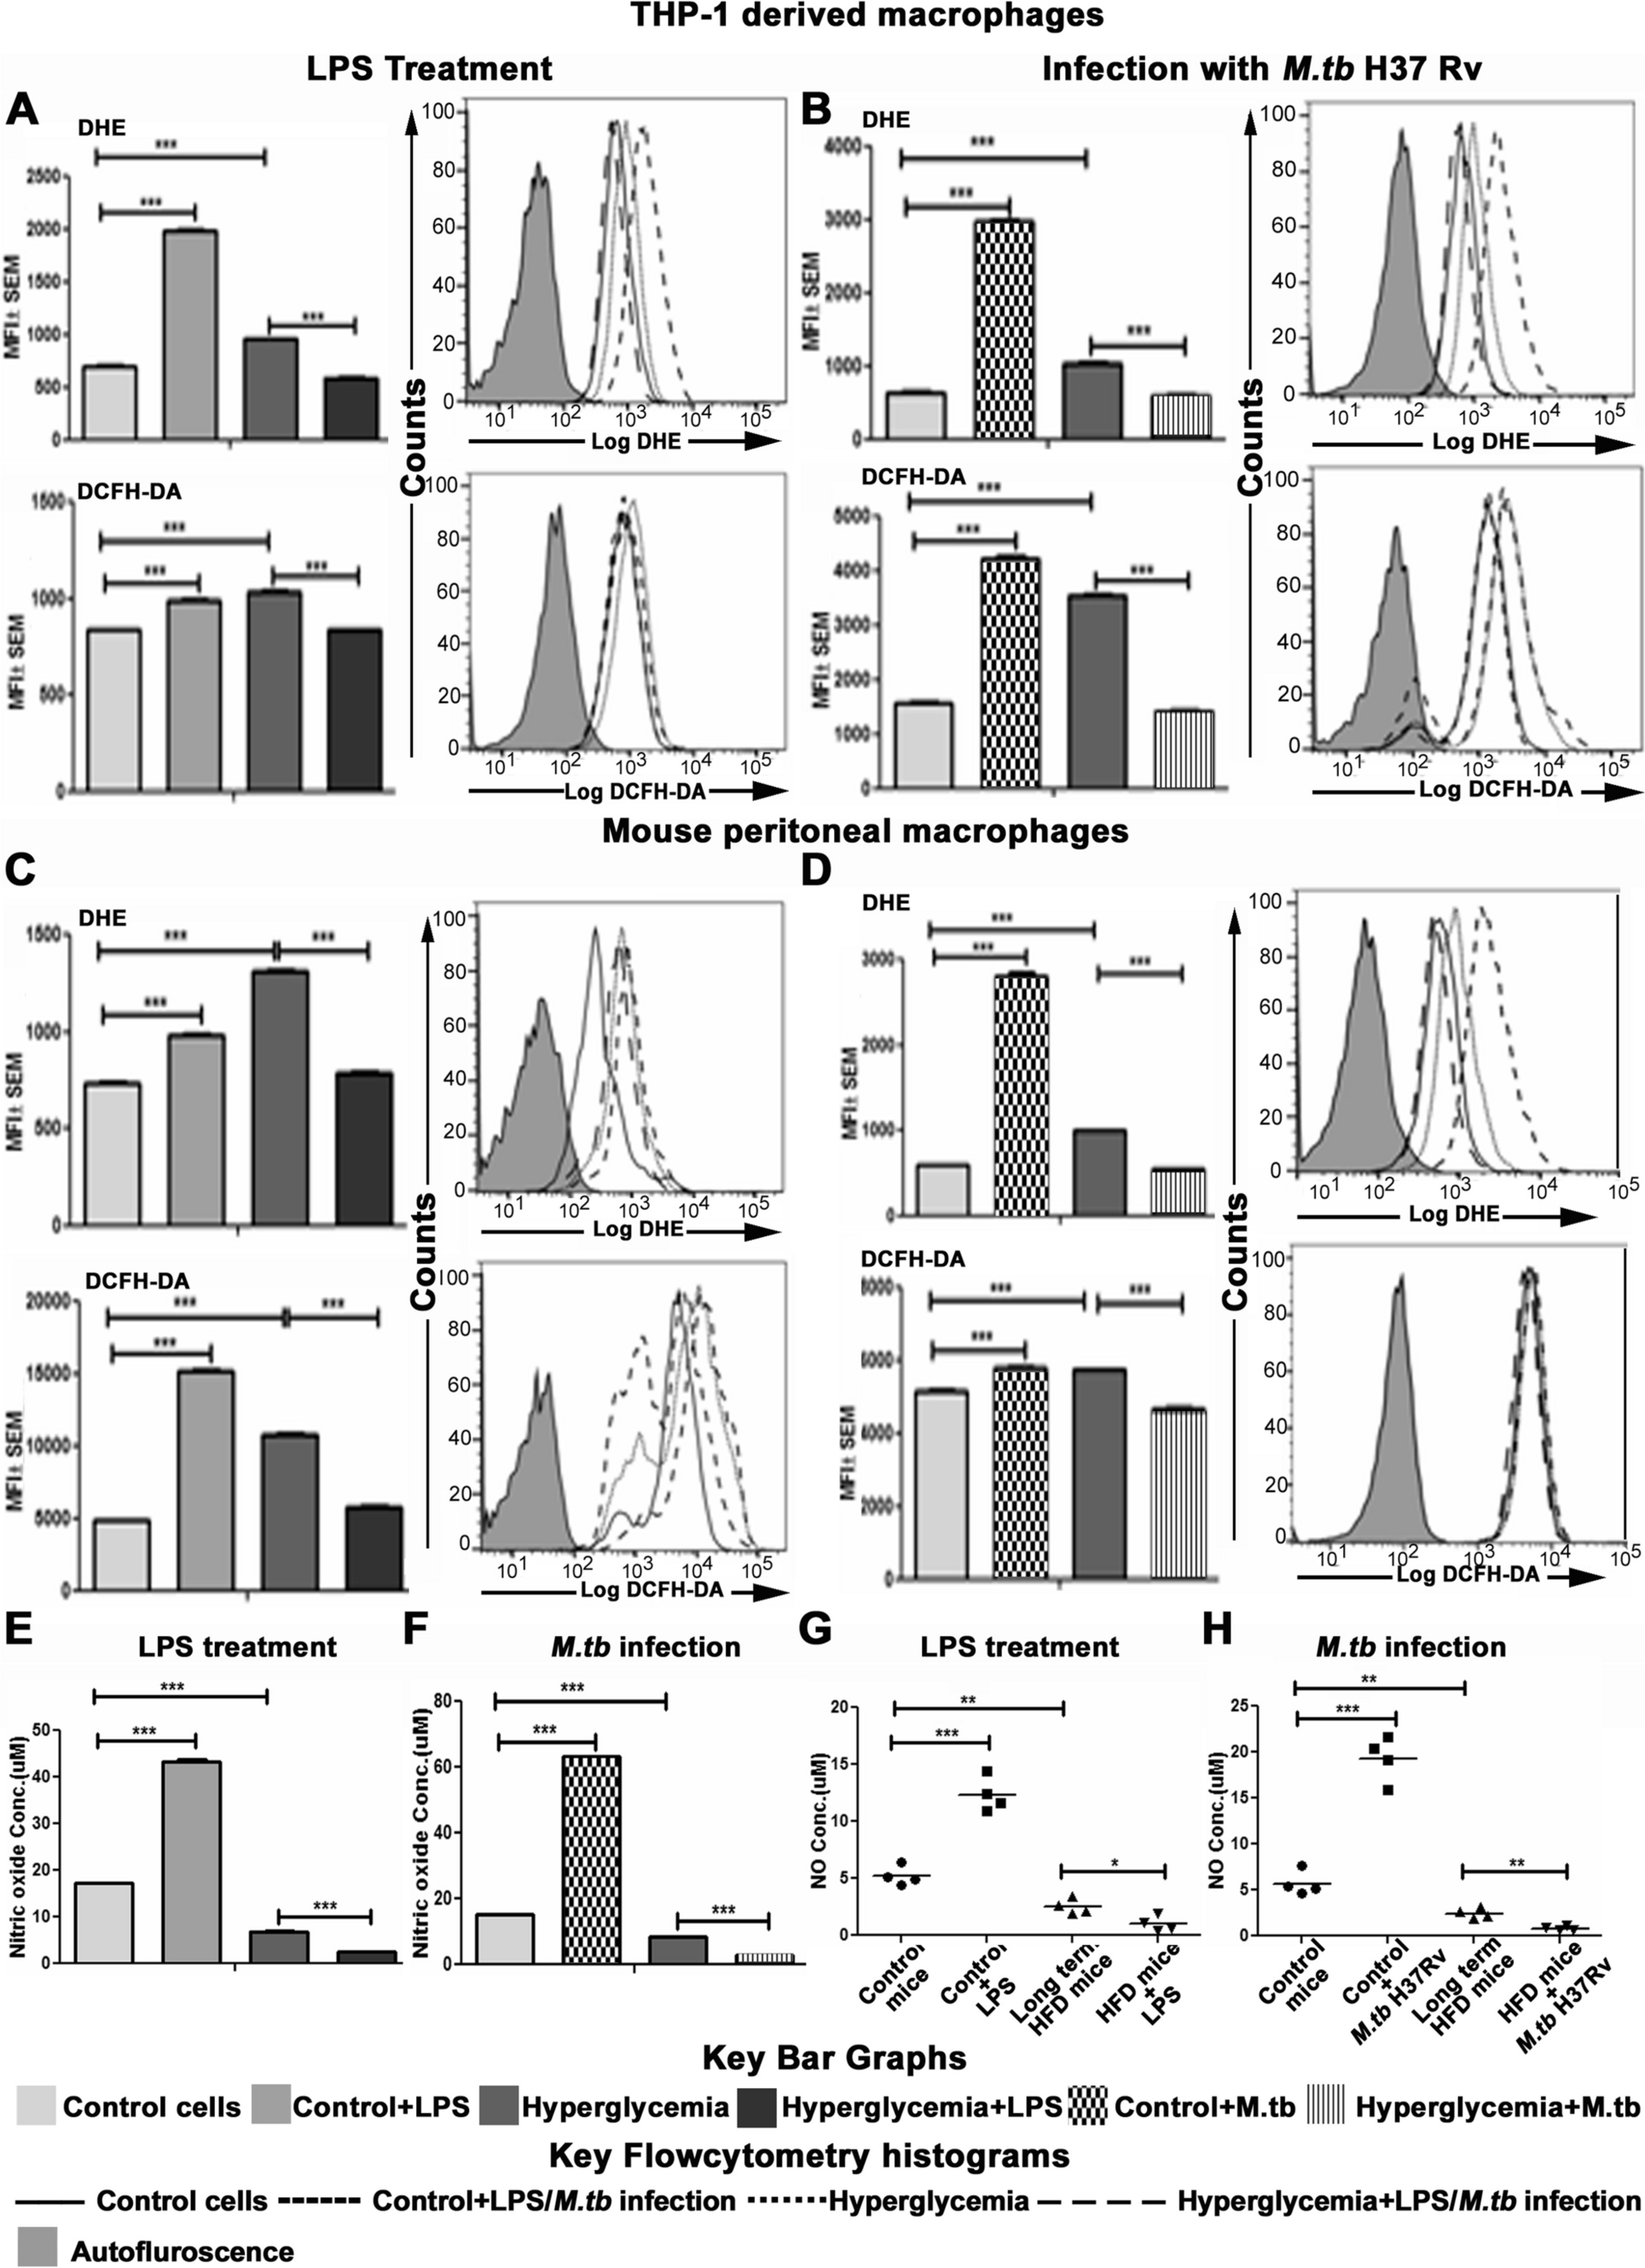 Chronic hyperglycemia impairs anti-microbial function of macrophages in response to Mycobacterium tuberculosis infection